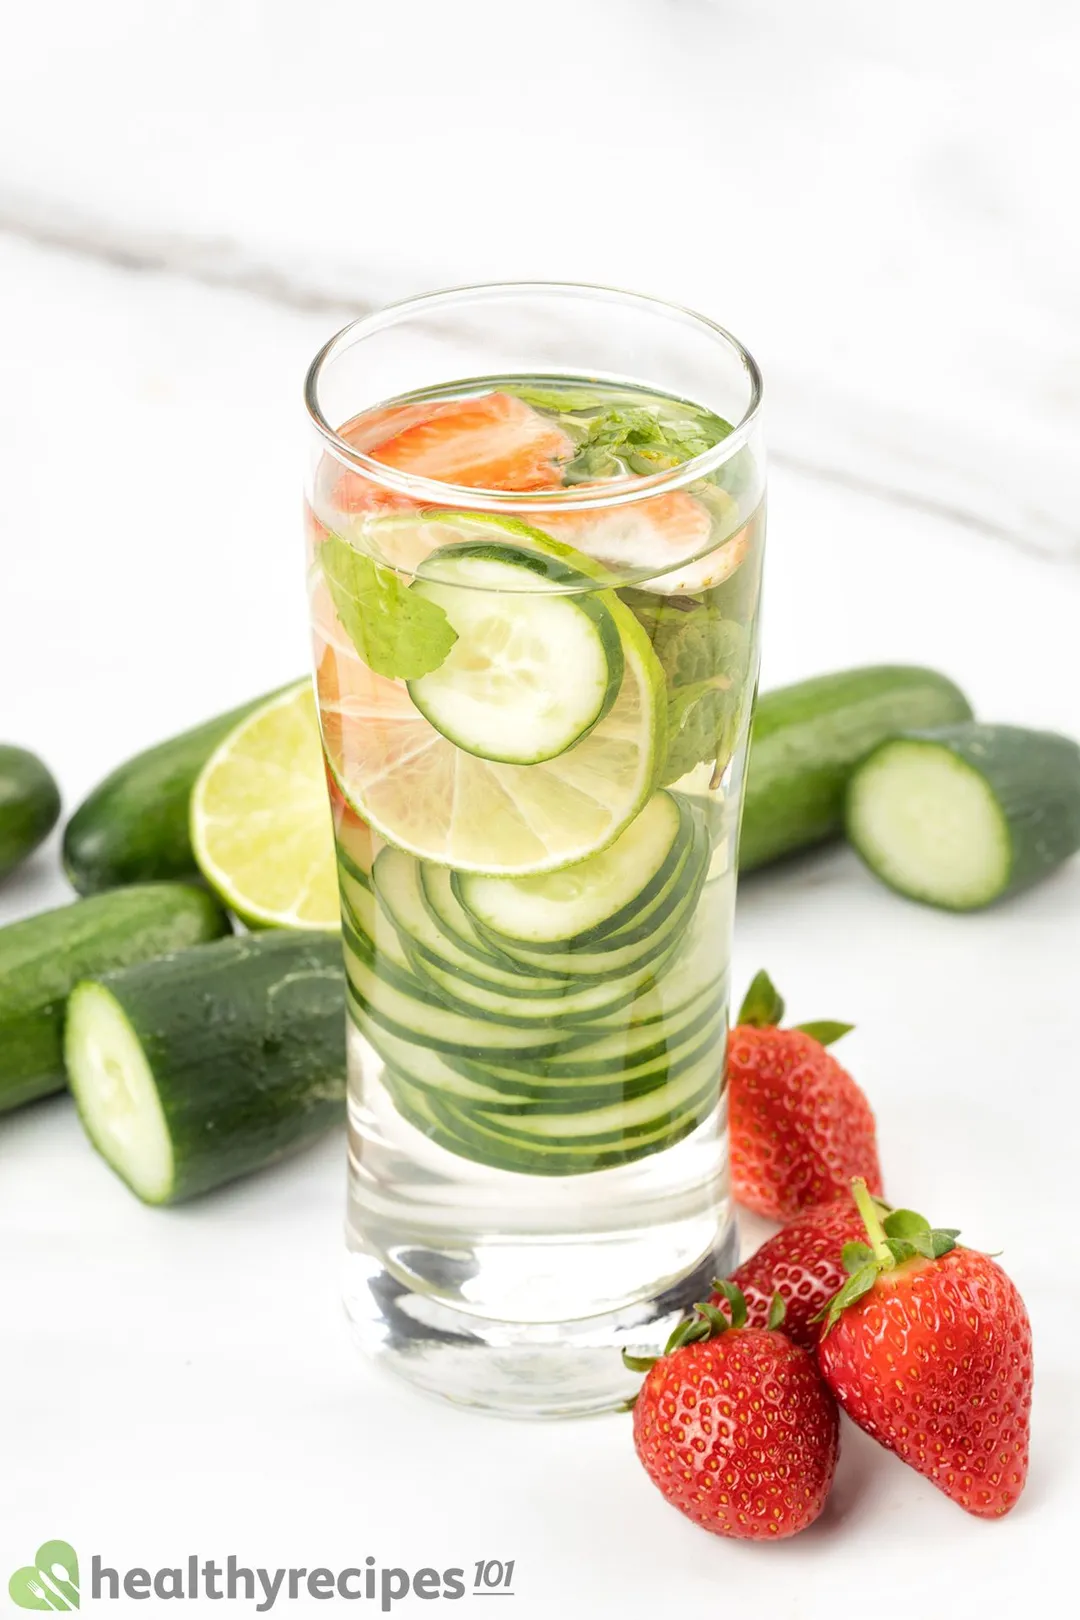 a glass of Cucumber Strawberry Water decorated by strawberries and cucumber